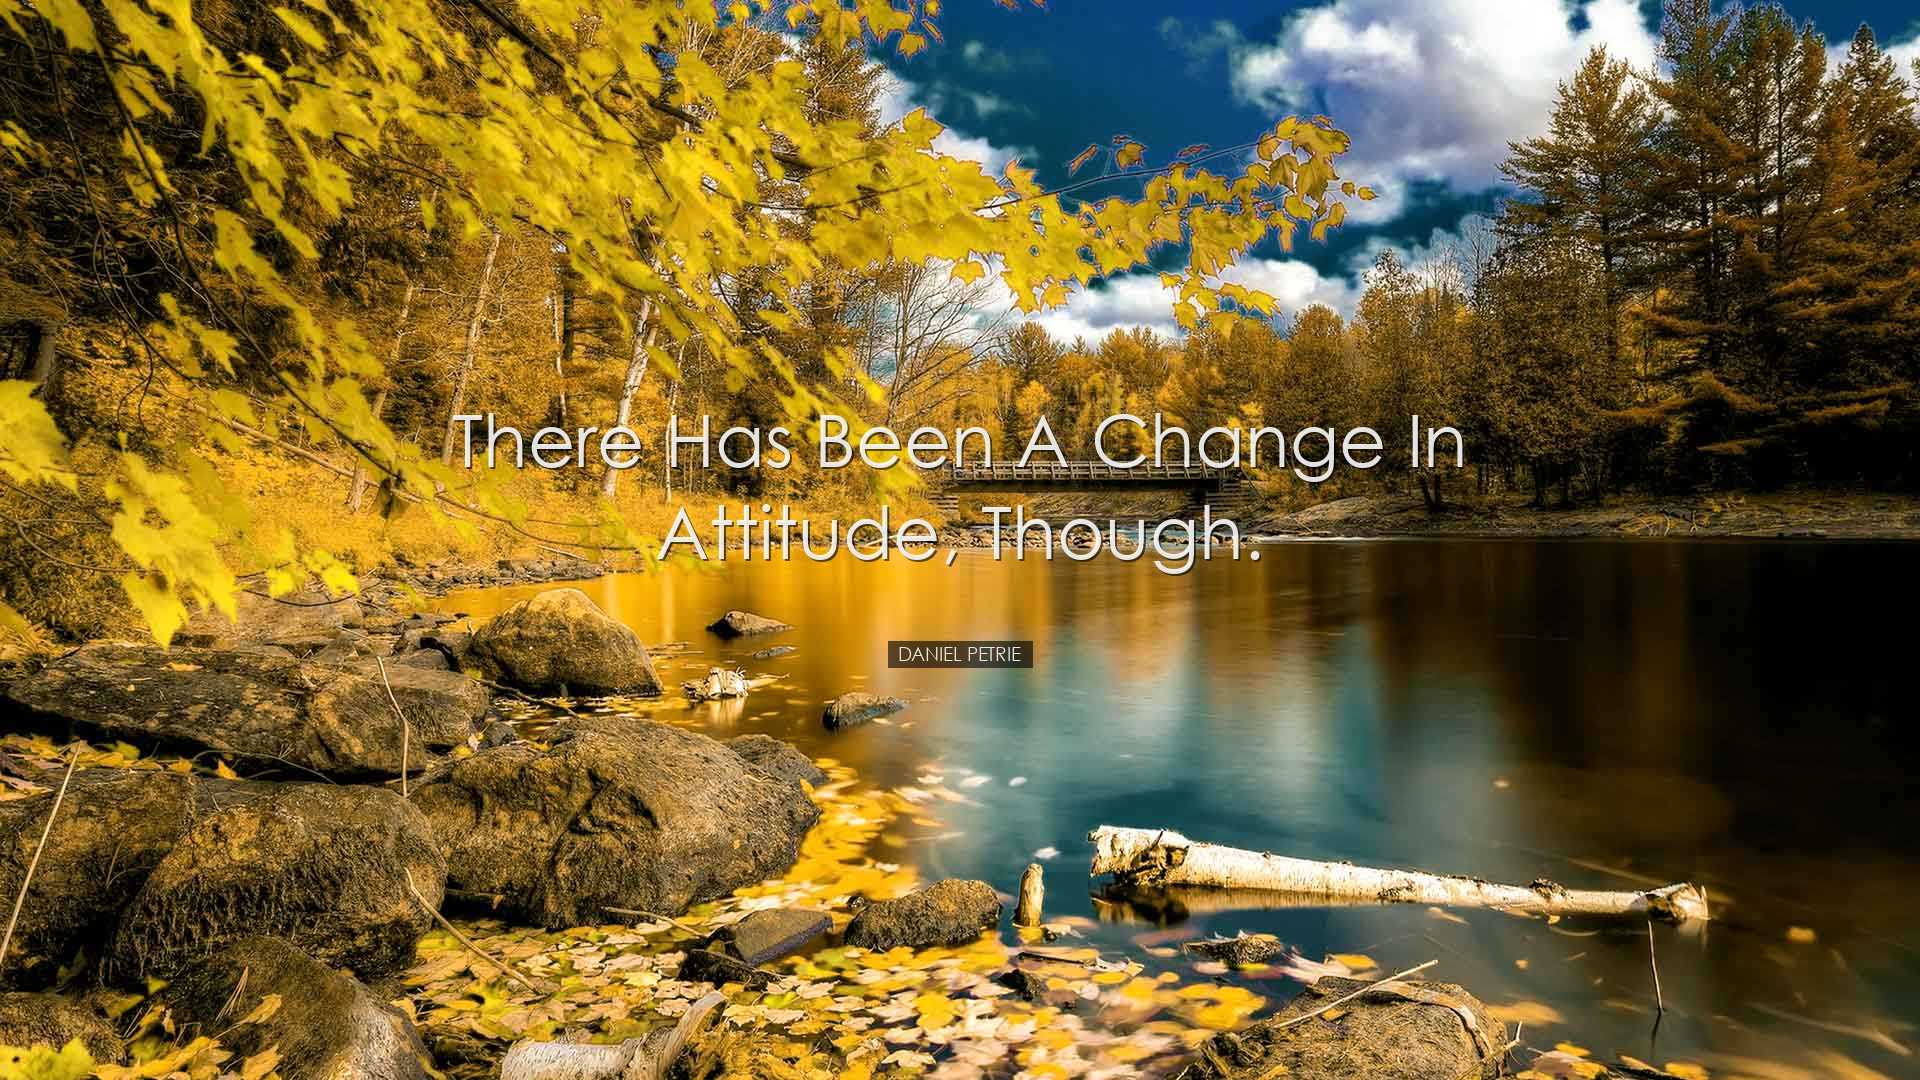 There has been a change in attitude, though. - Daniel Petrie